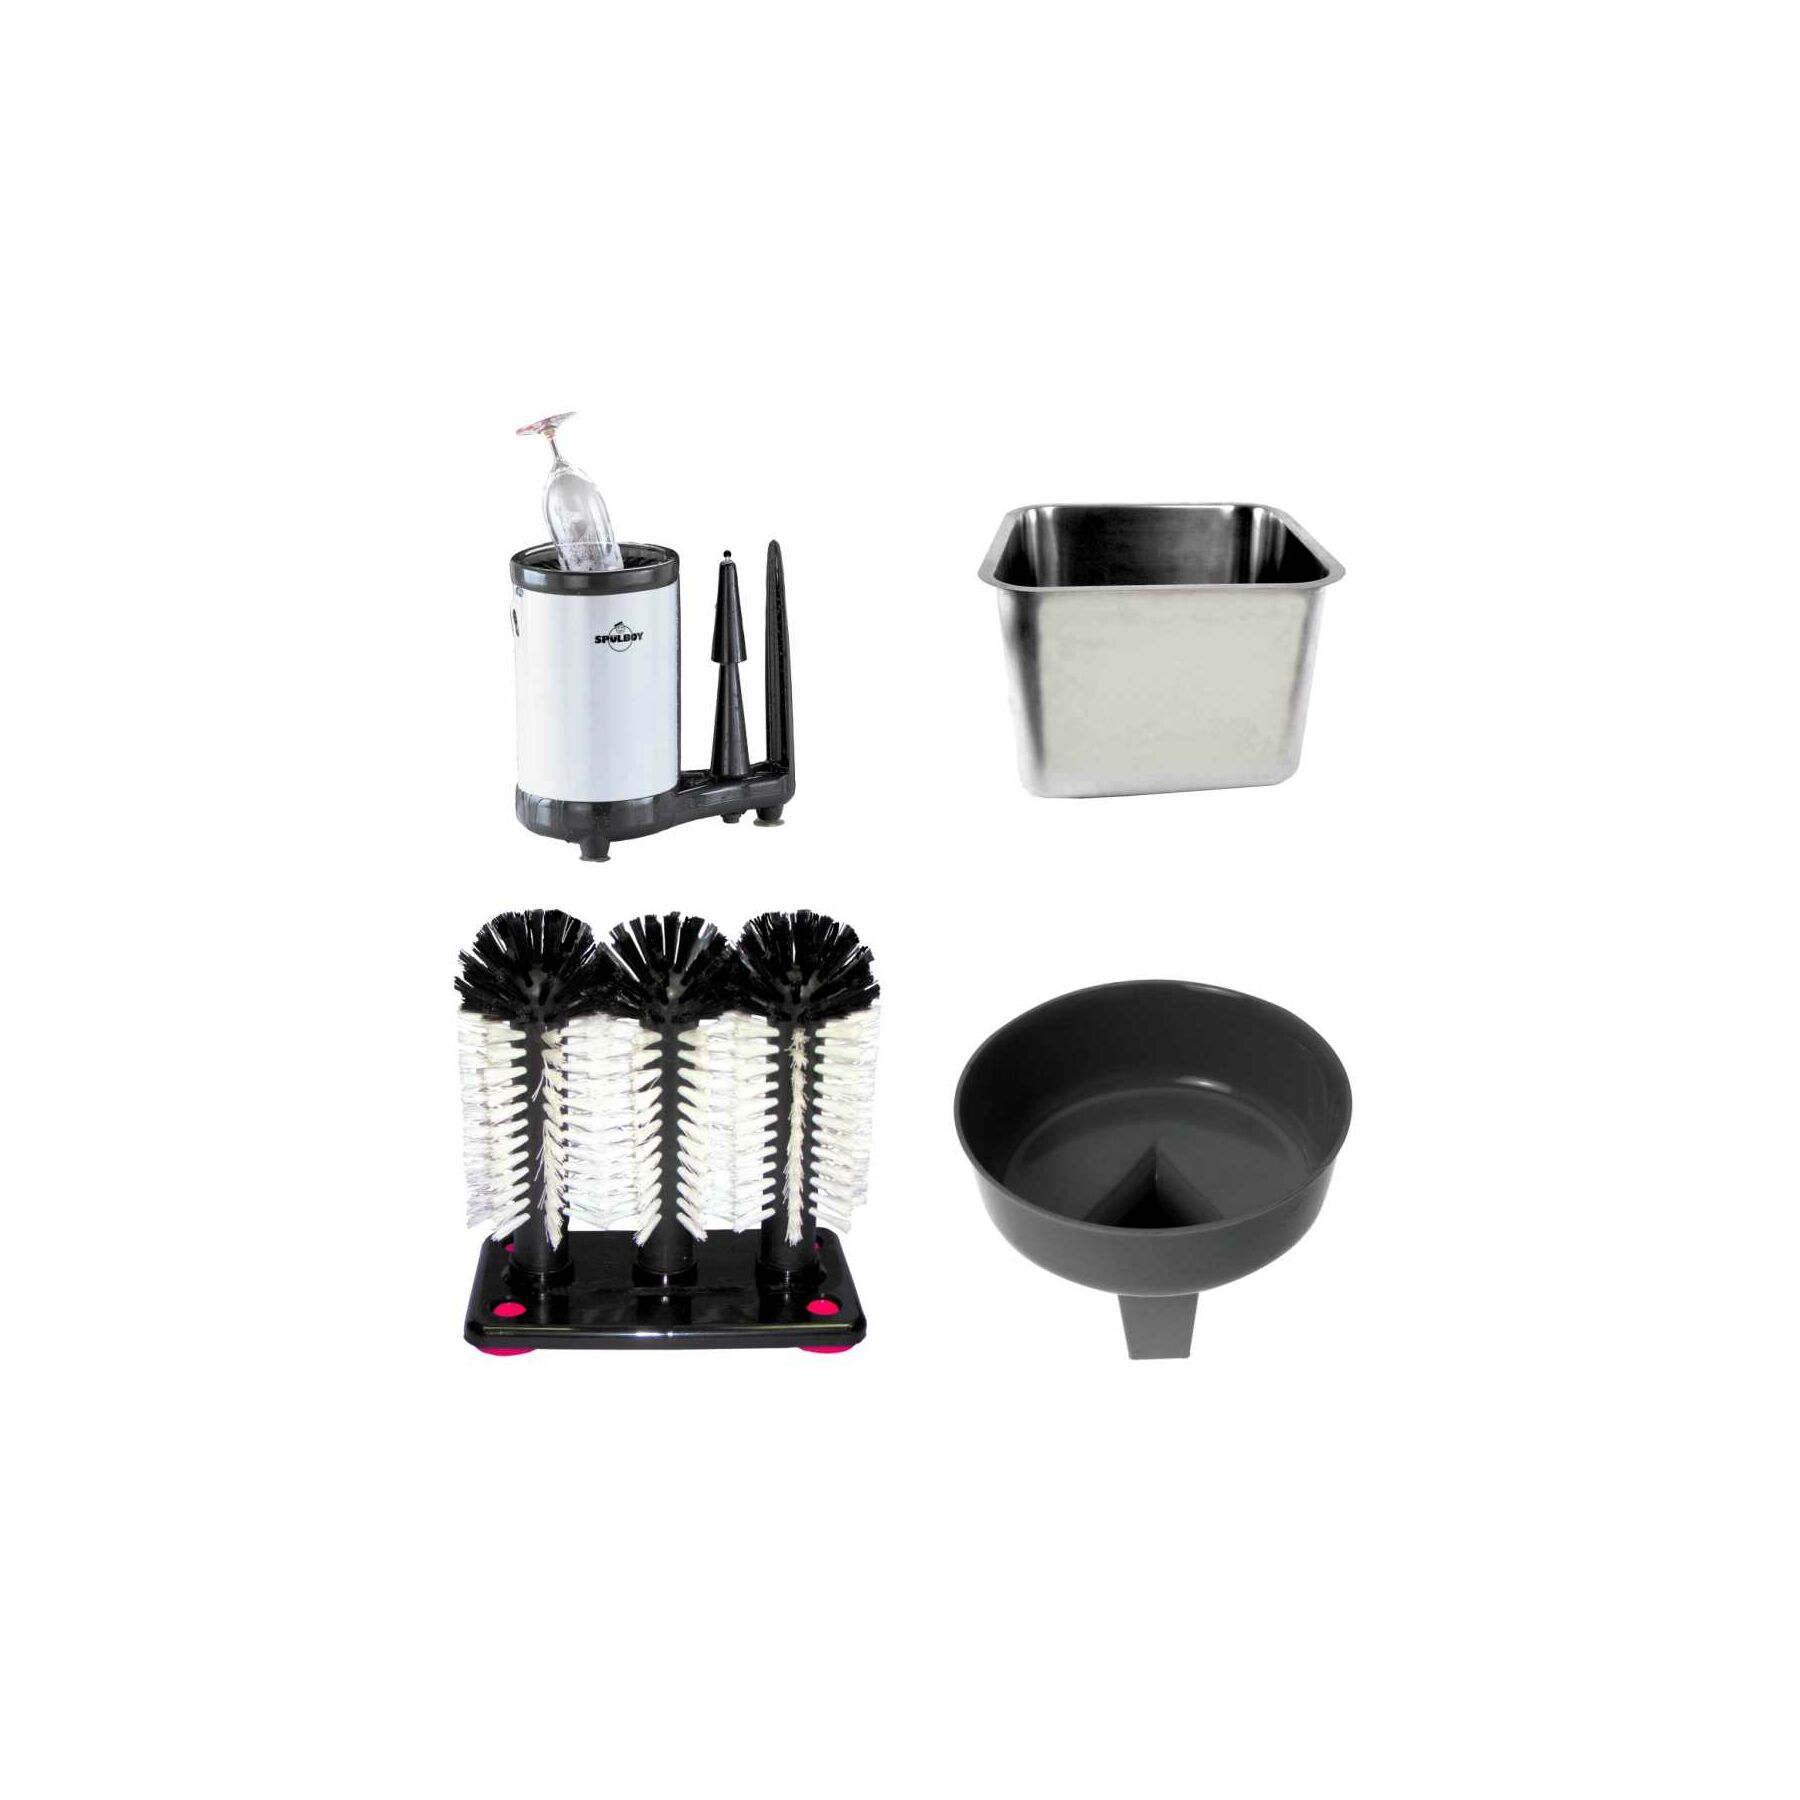 Sinks, glass washers and accessories